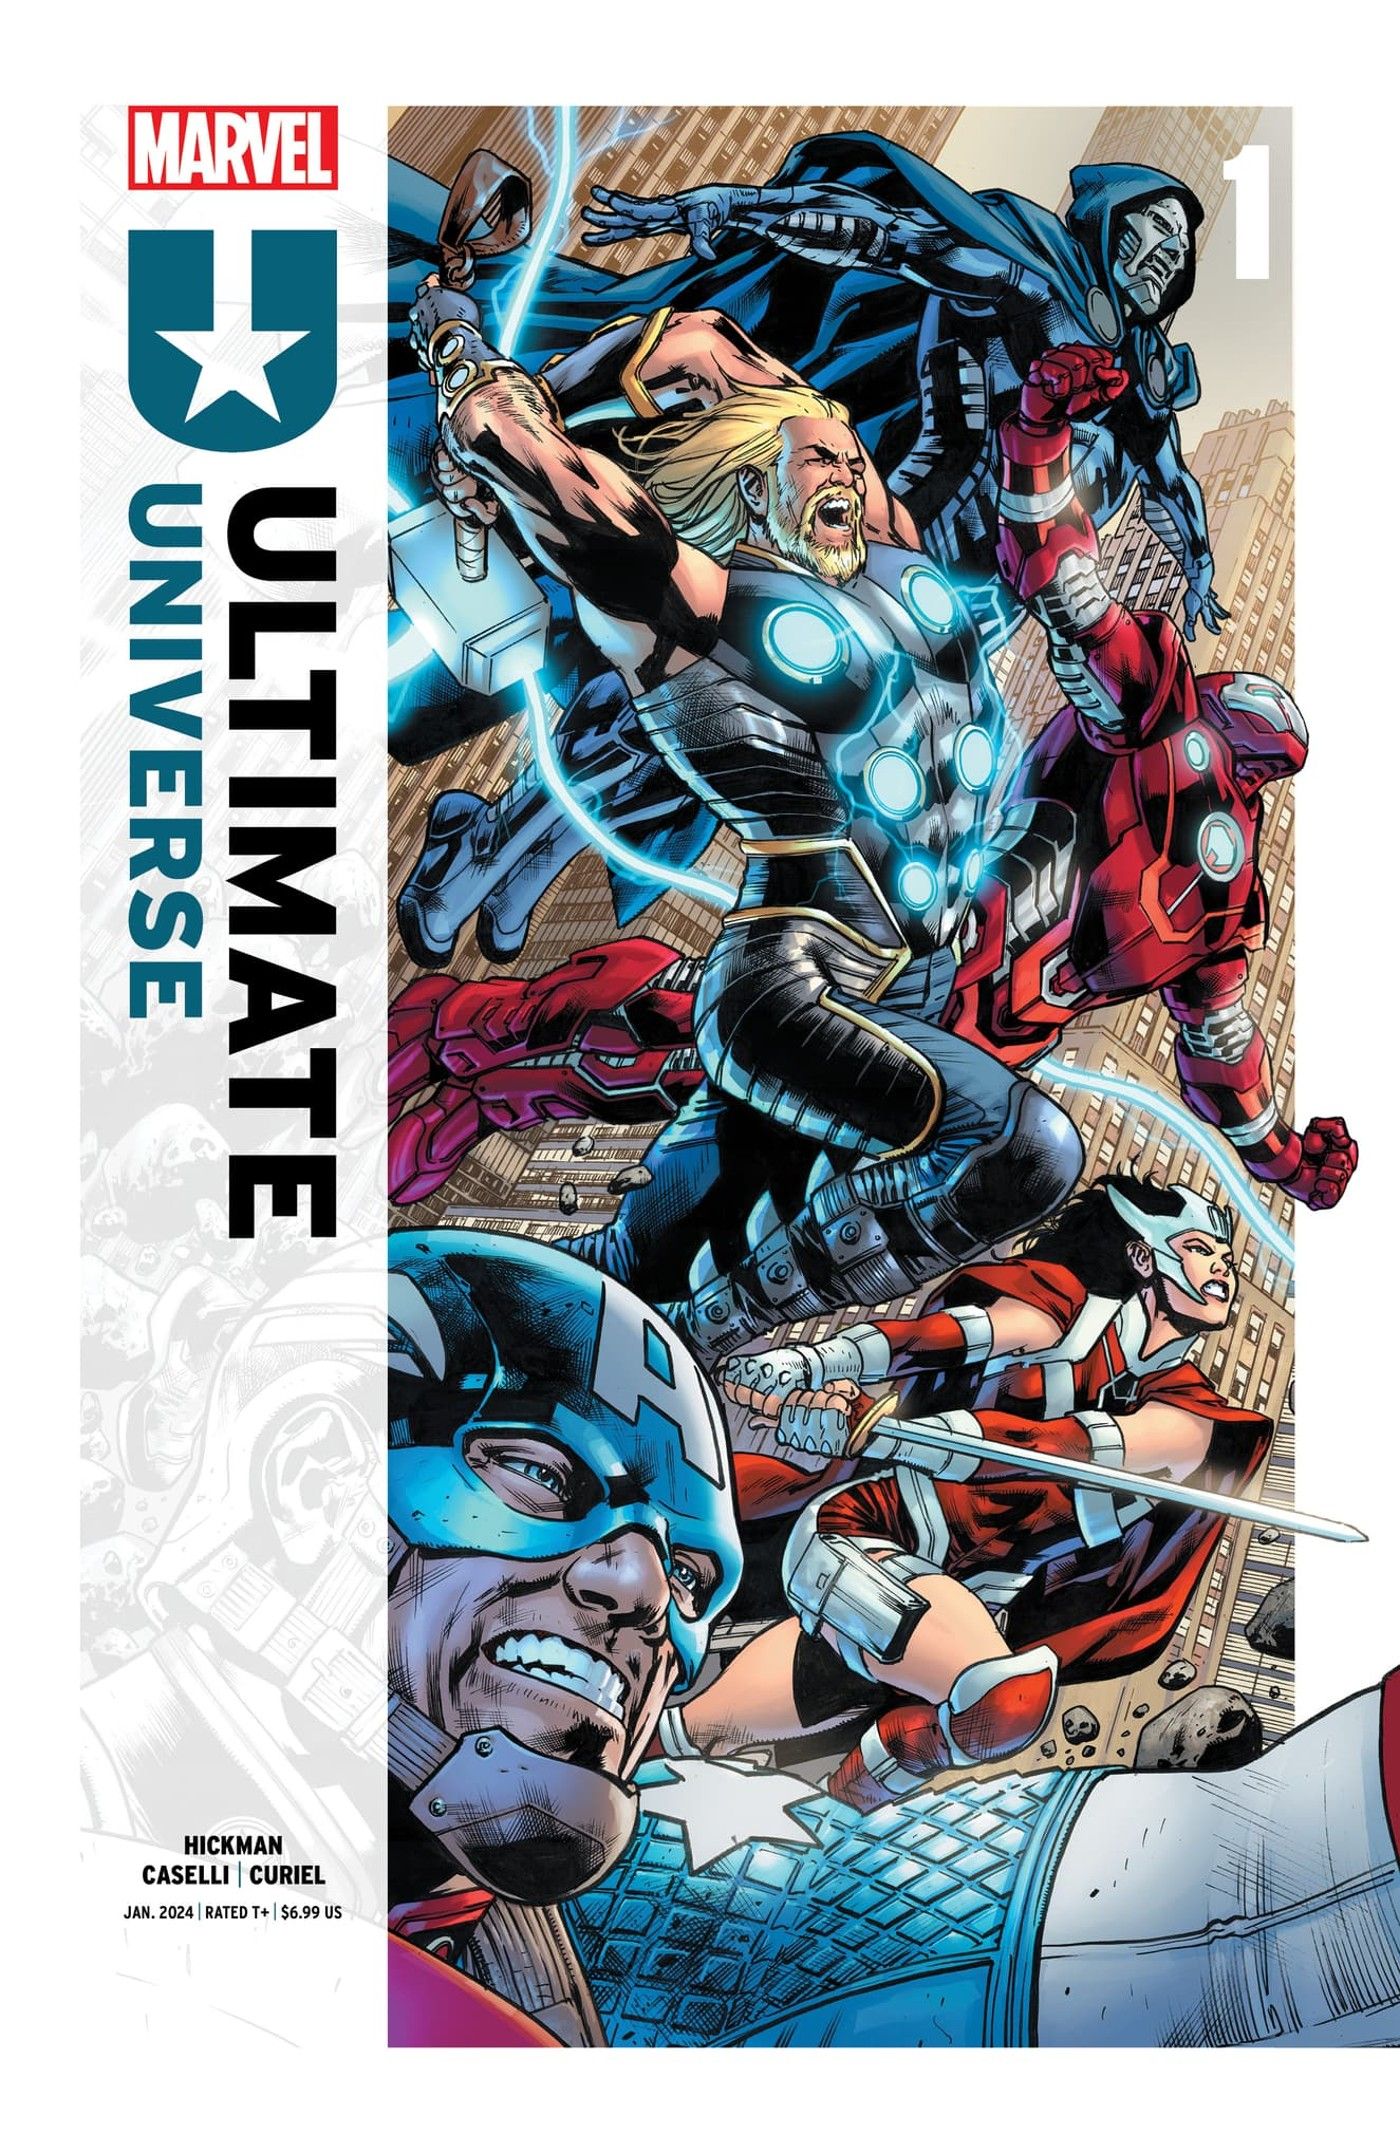 Marvel’s Ultimate Universe Debuts Its Avengers – With Shock MCU Hero as a Founding Member